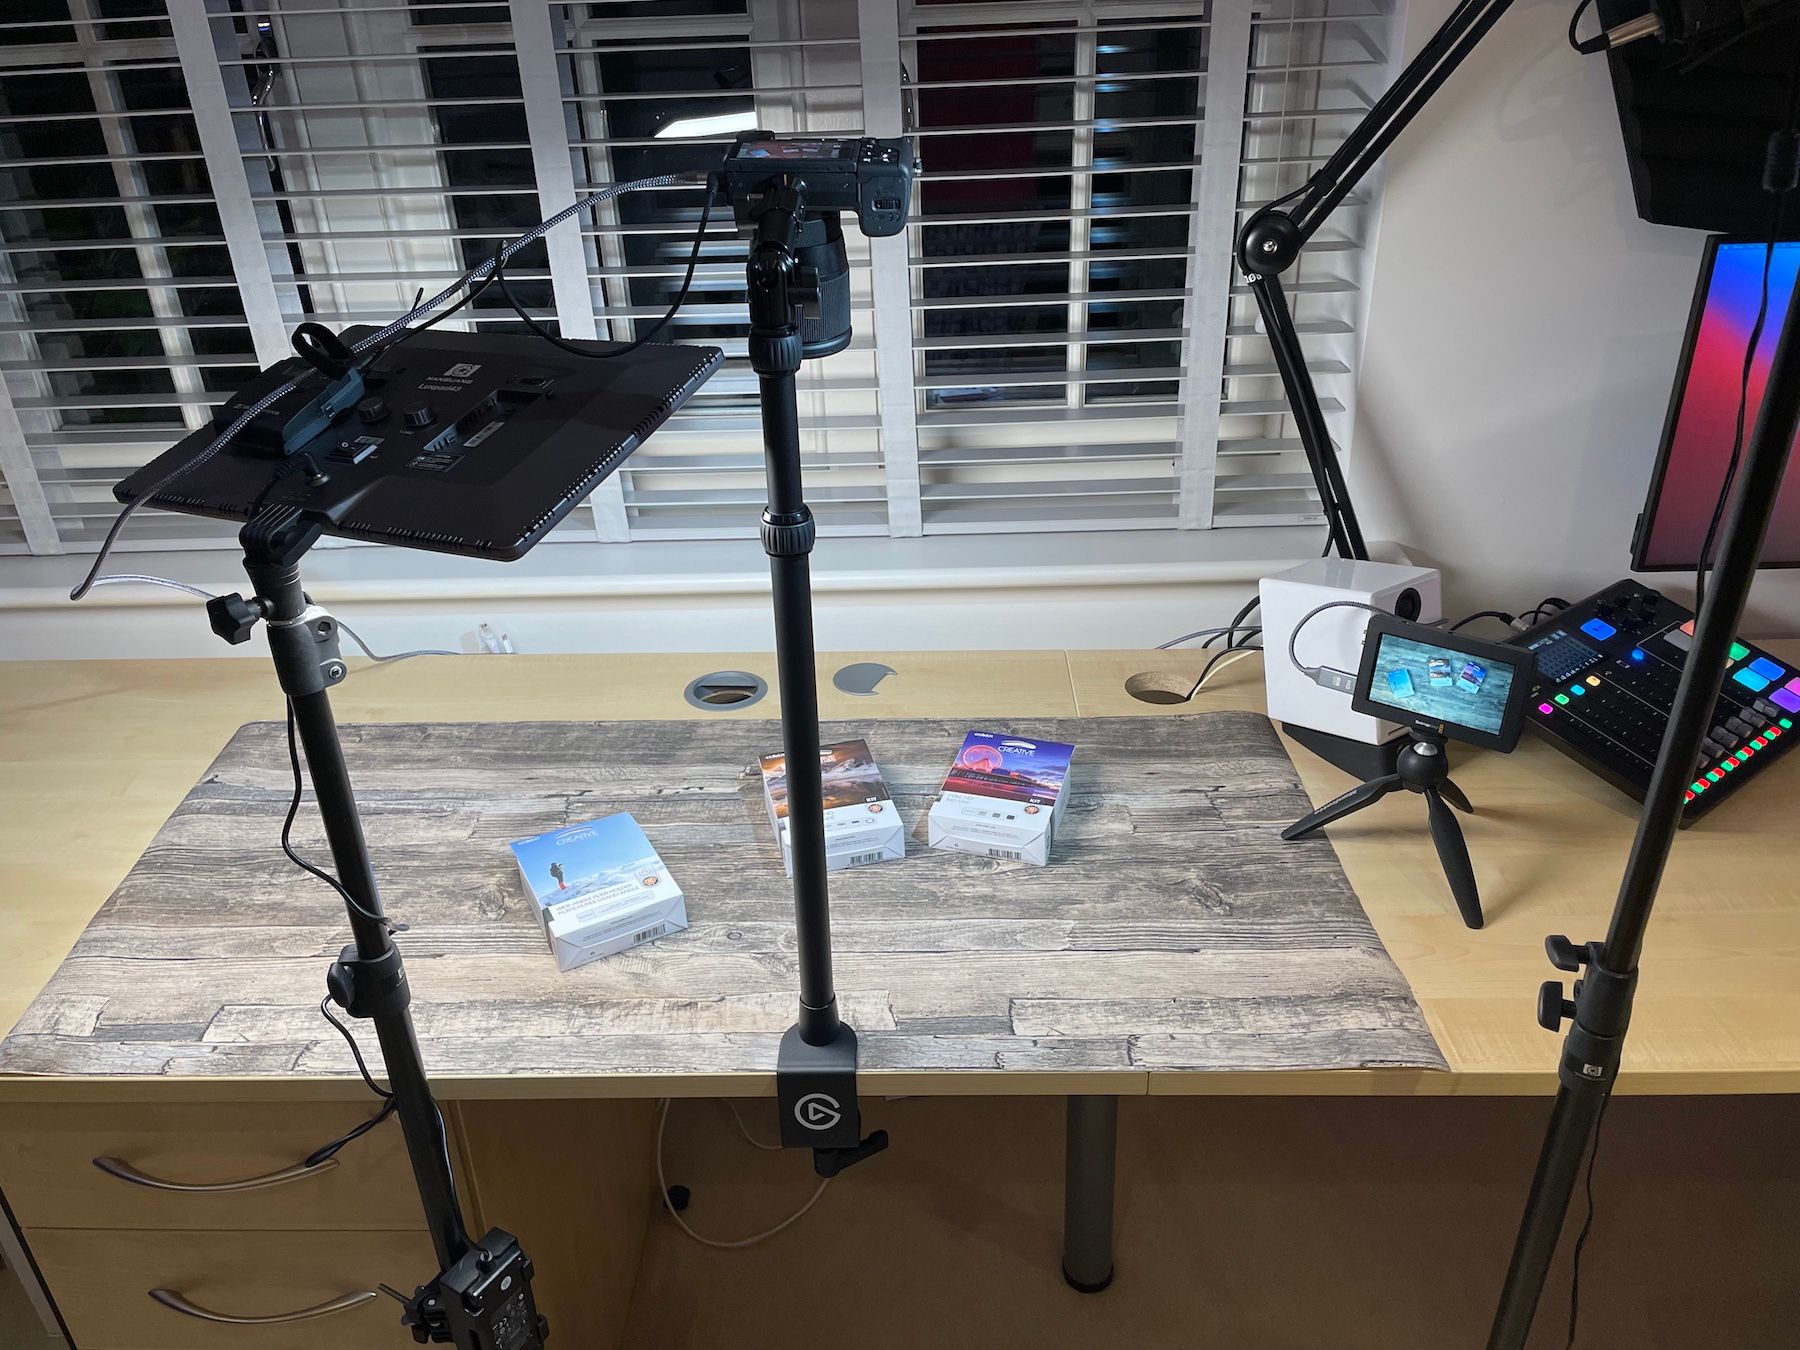 Unboxing some Cokin filters and accessories